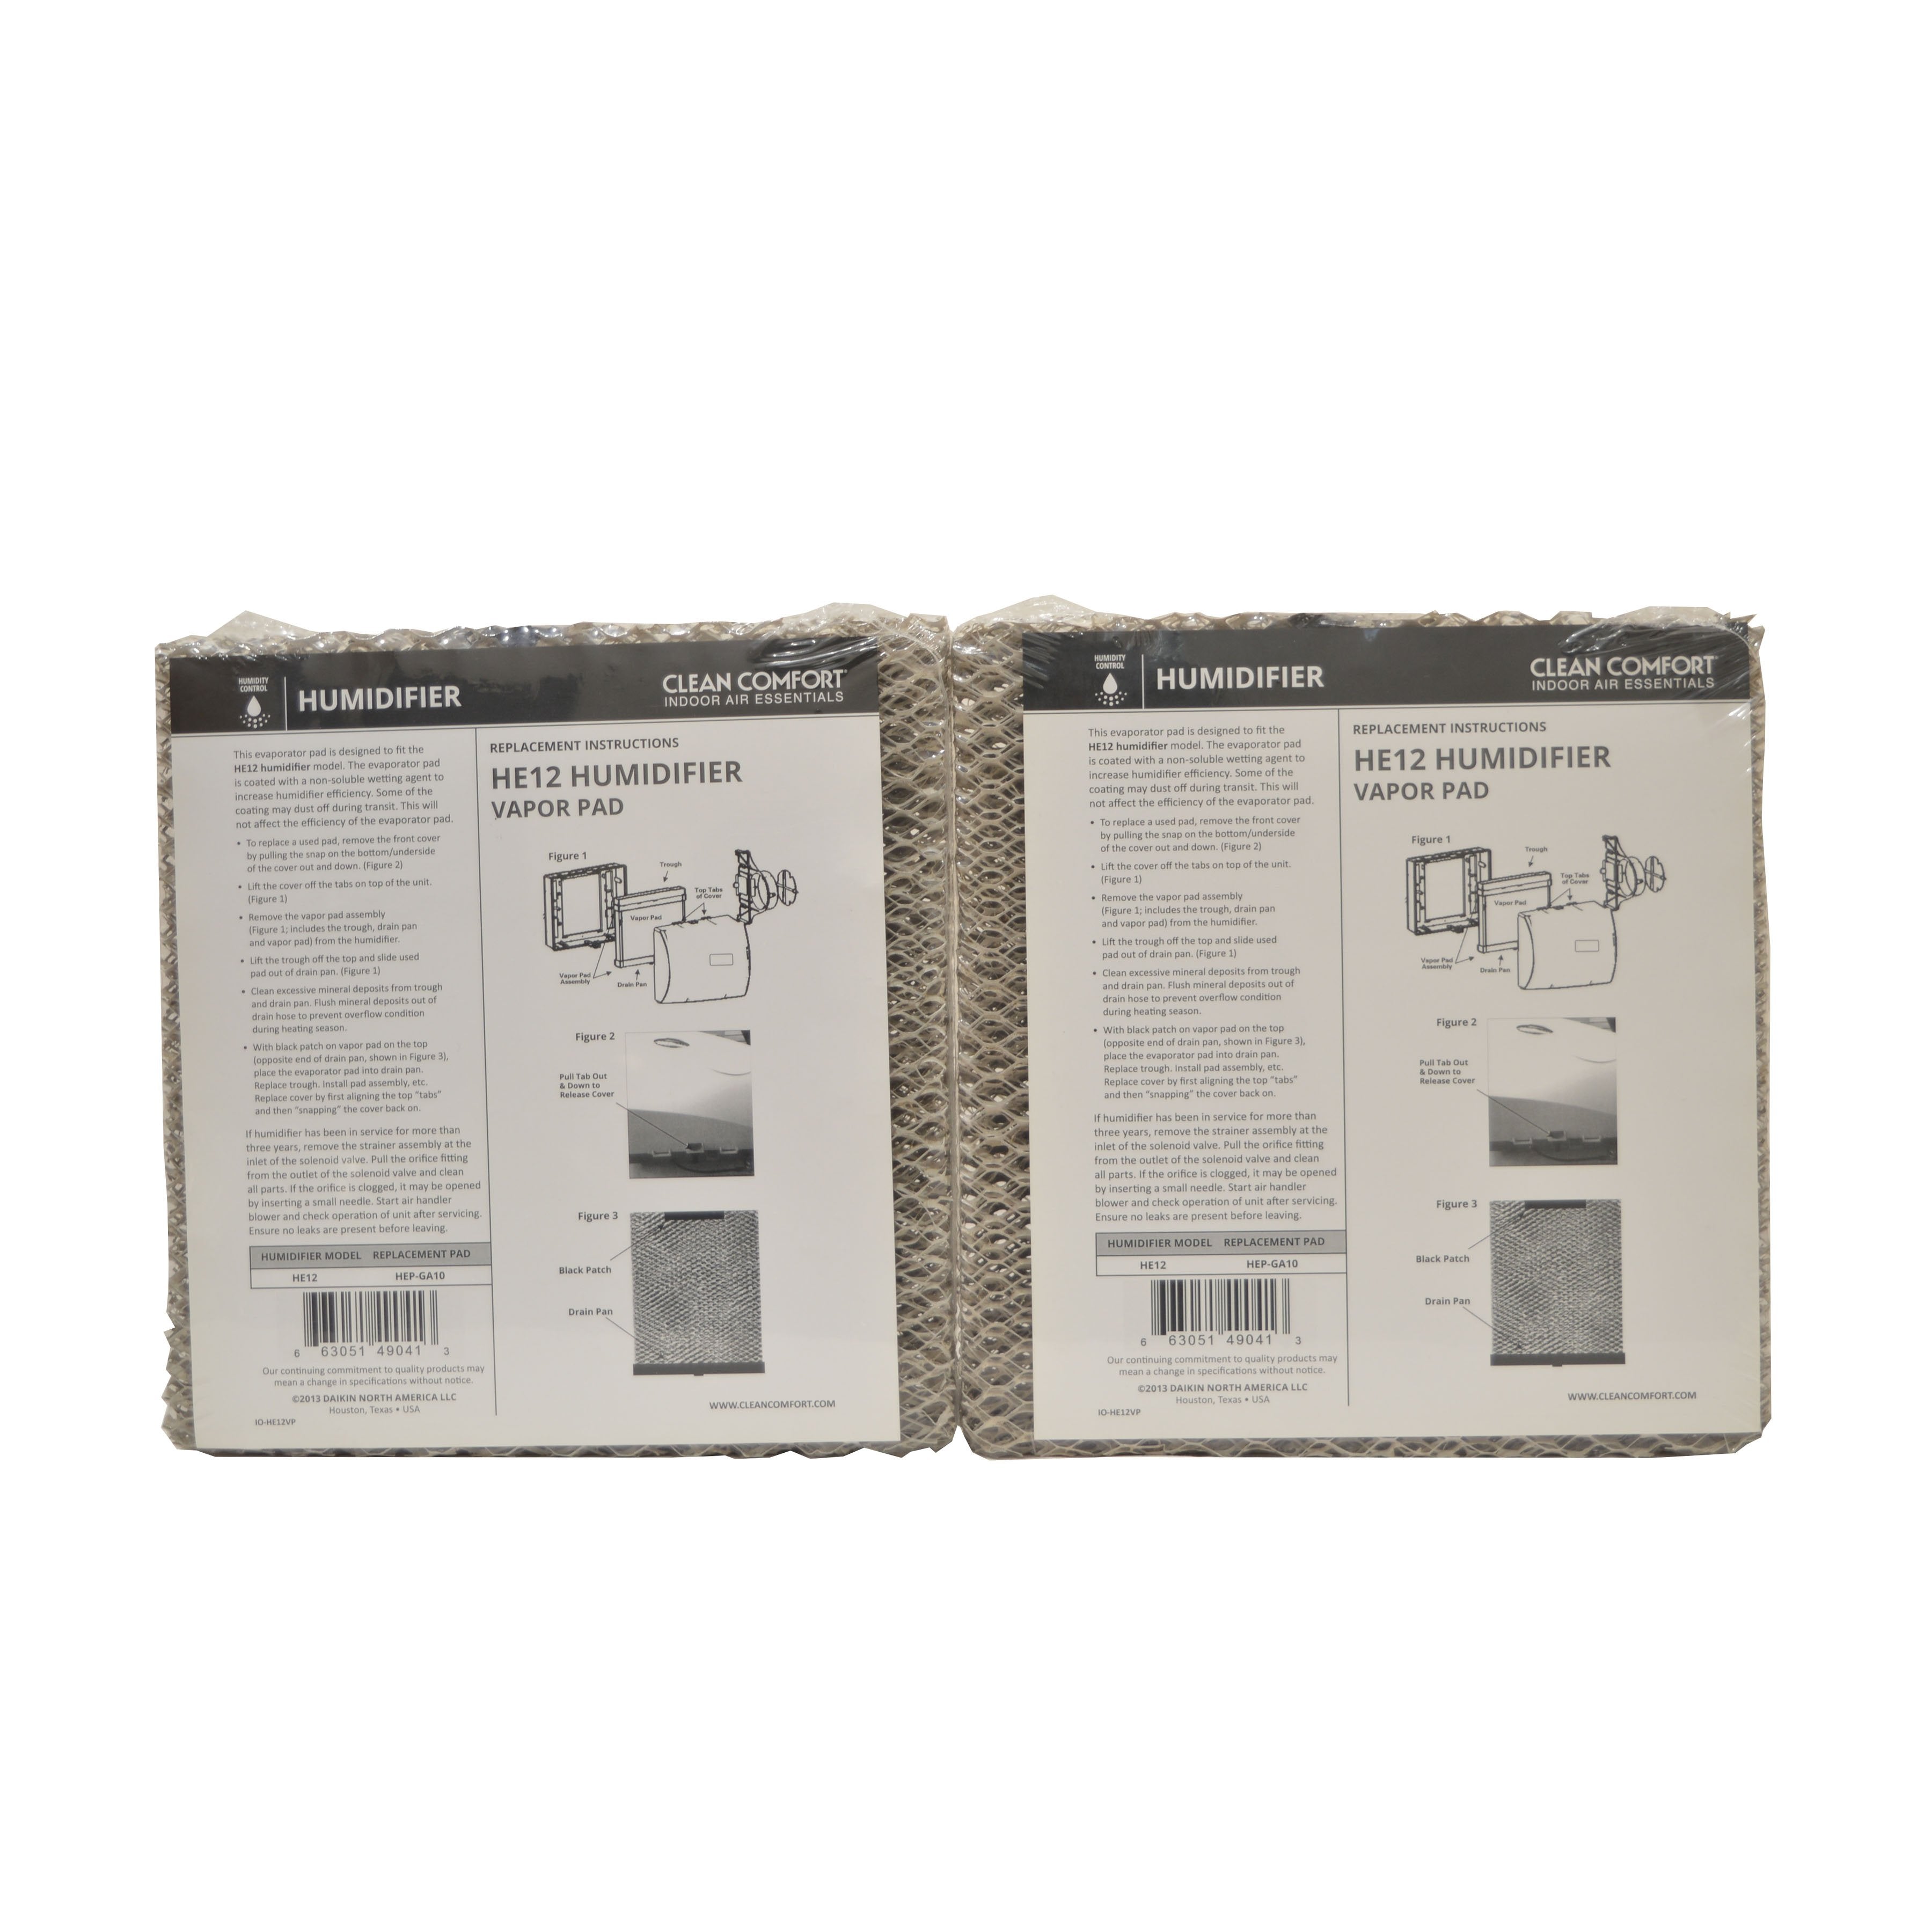 Clean Comfort HEP-GA10 Humidifier Vapor Pad For HE12. Replacement Part # GA10 by Generalaire. Package of 2